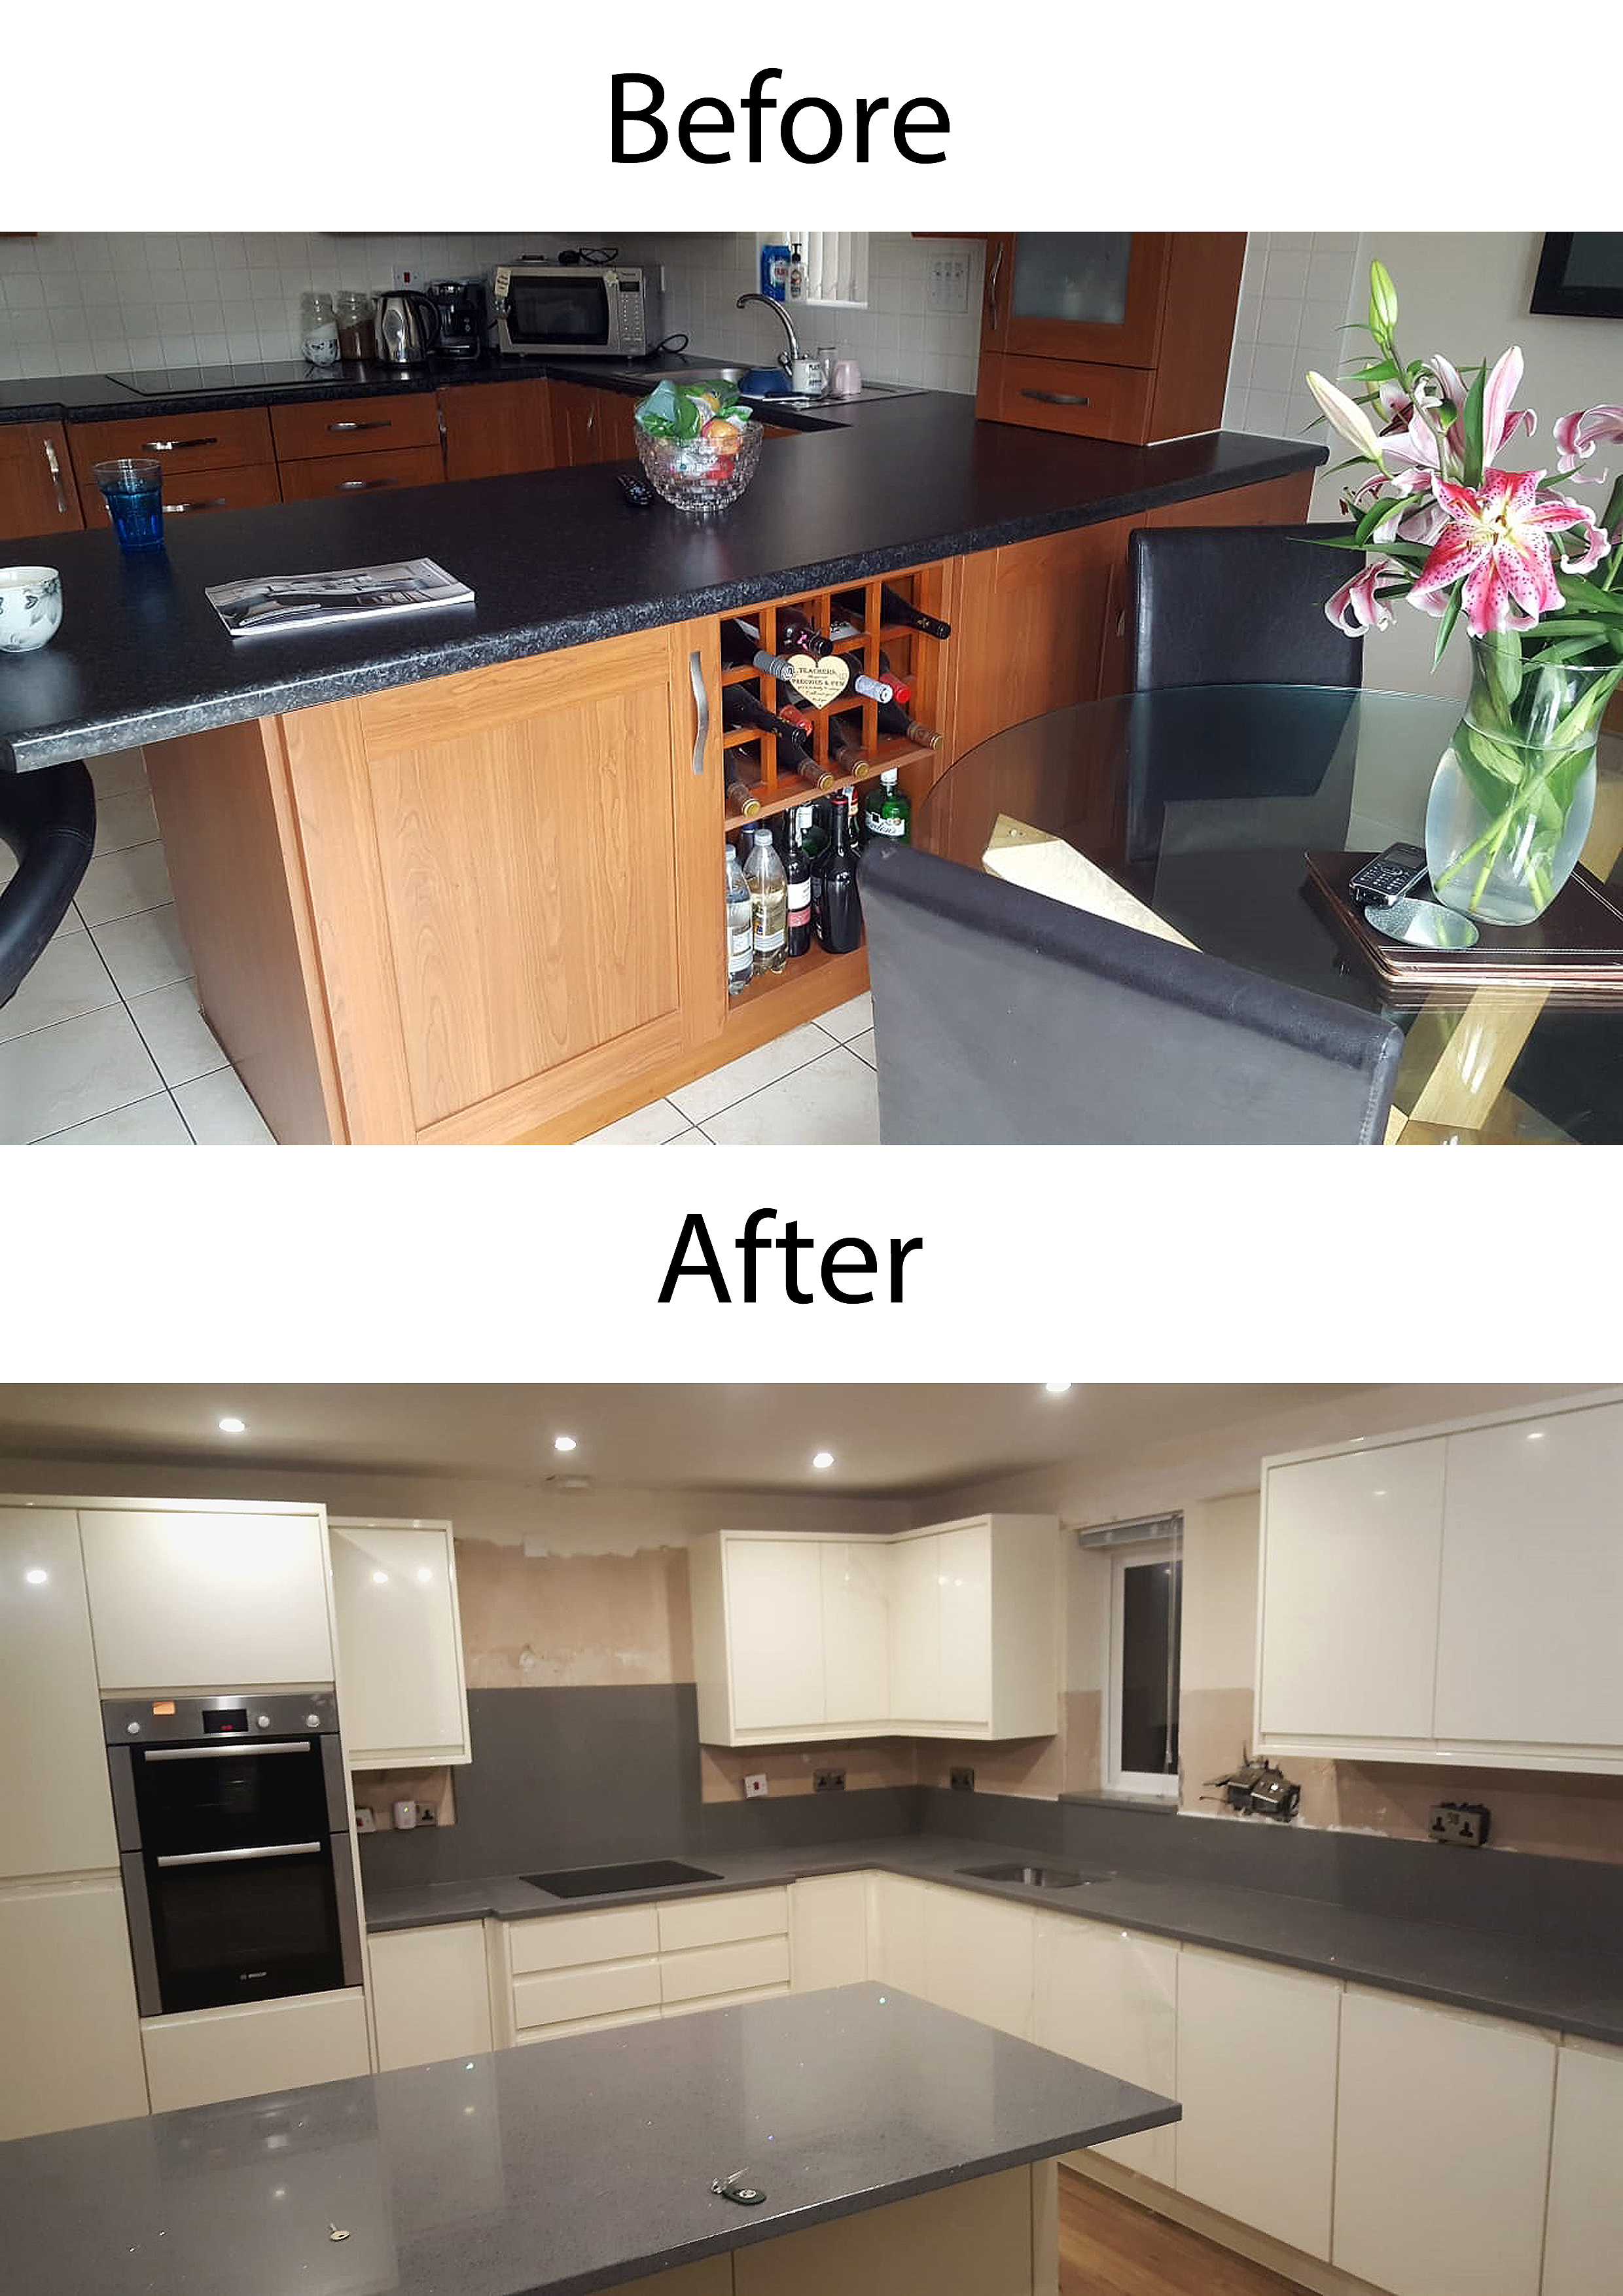 Kitchens Bathrooms and Bedrooms Wirral Liverpool Cheshire - Bespoke Kitchens Bathrooms Bedrooms Interior Fitting Joinery Wirral Liverpool Cheshire